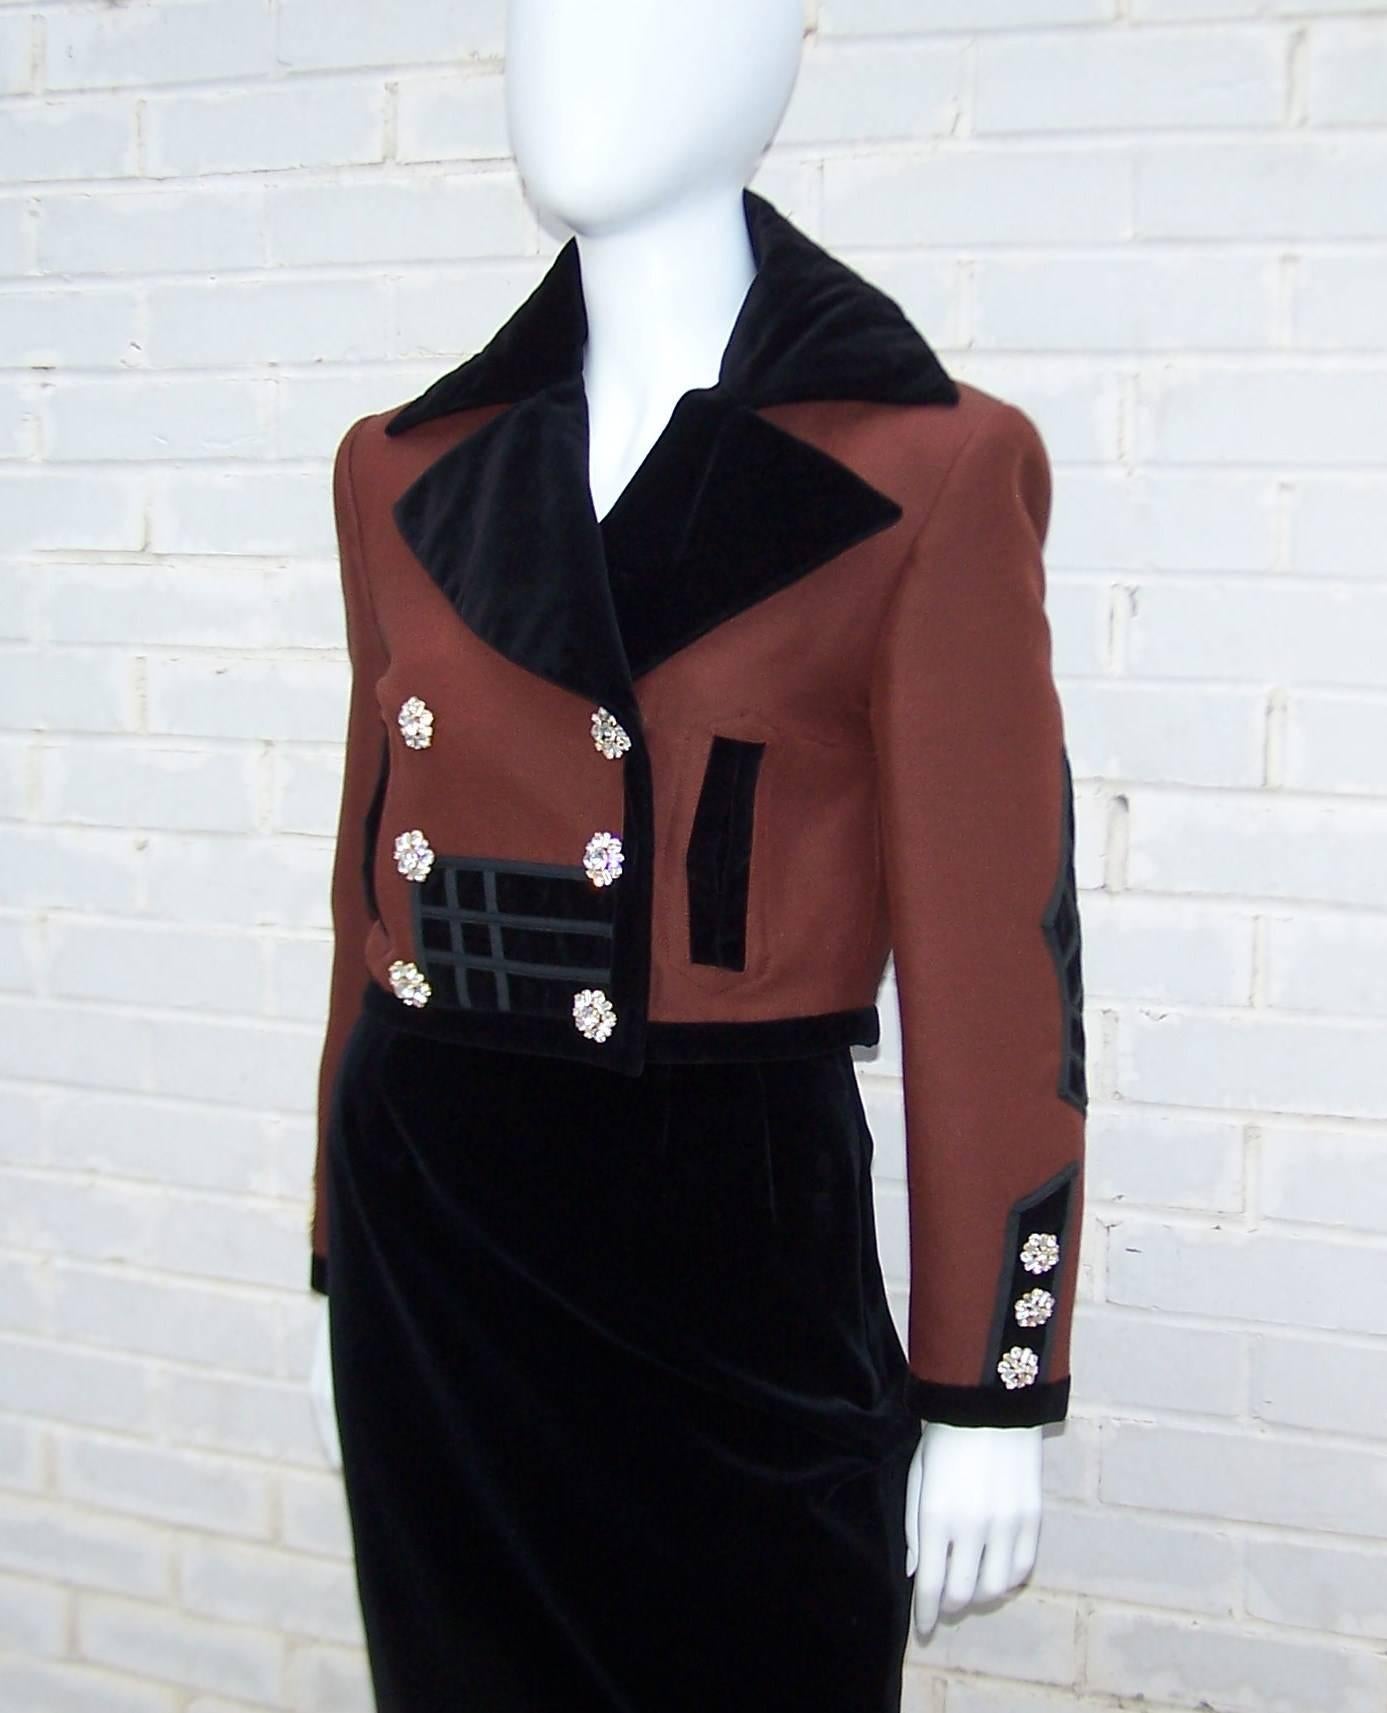 Women's Christian LaCroix Velvet & Wool Evening Suit With Rhinestone Buttons, C.1990 For Sale